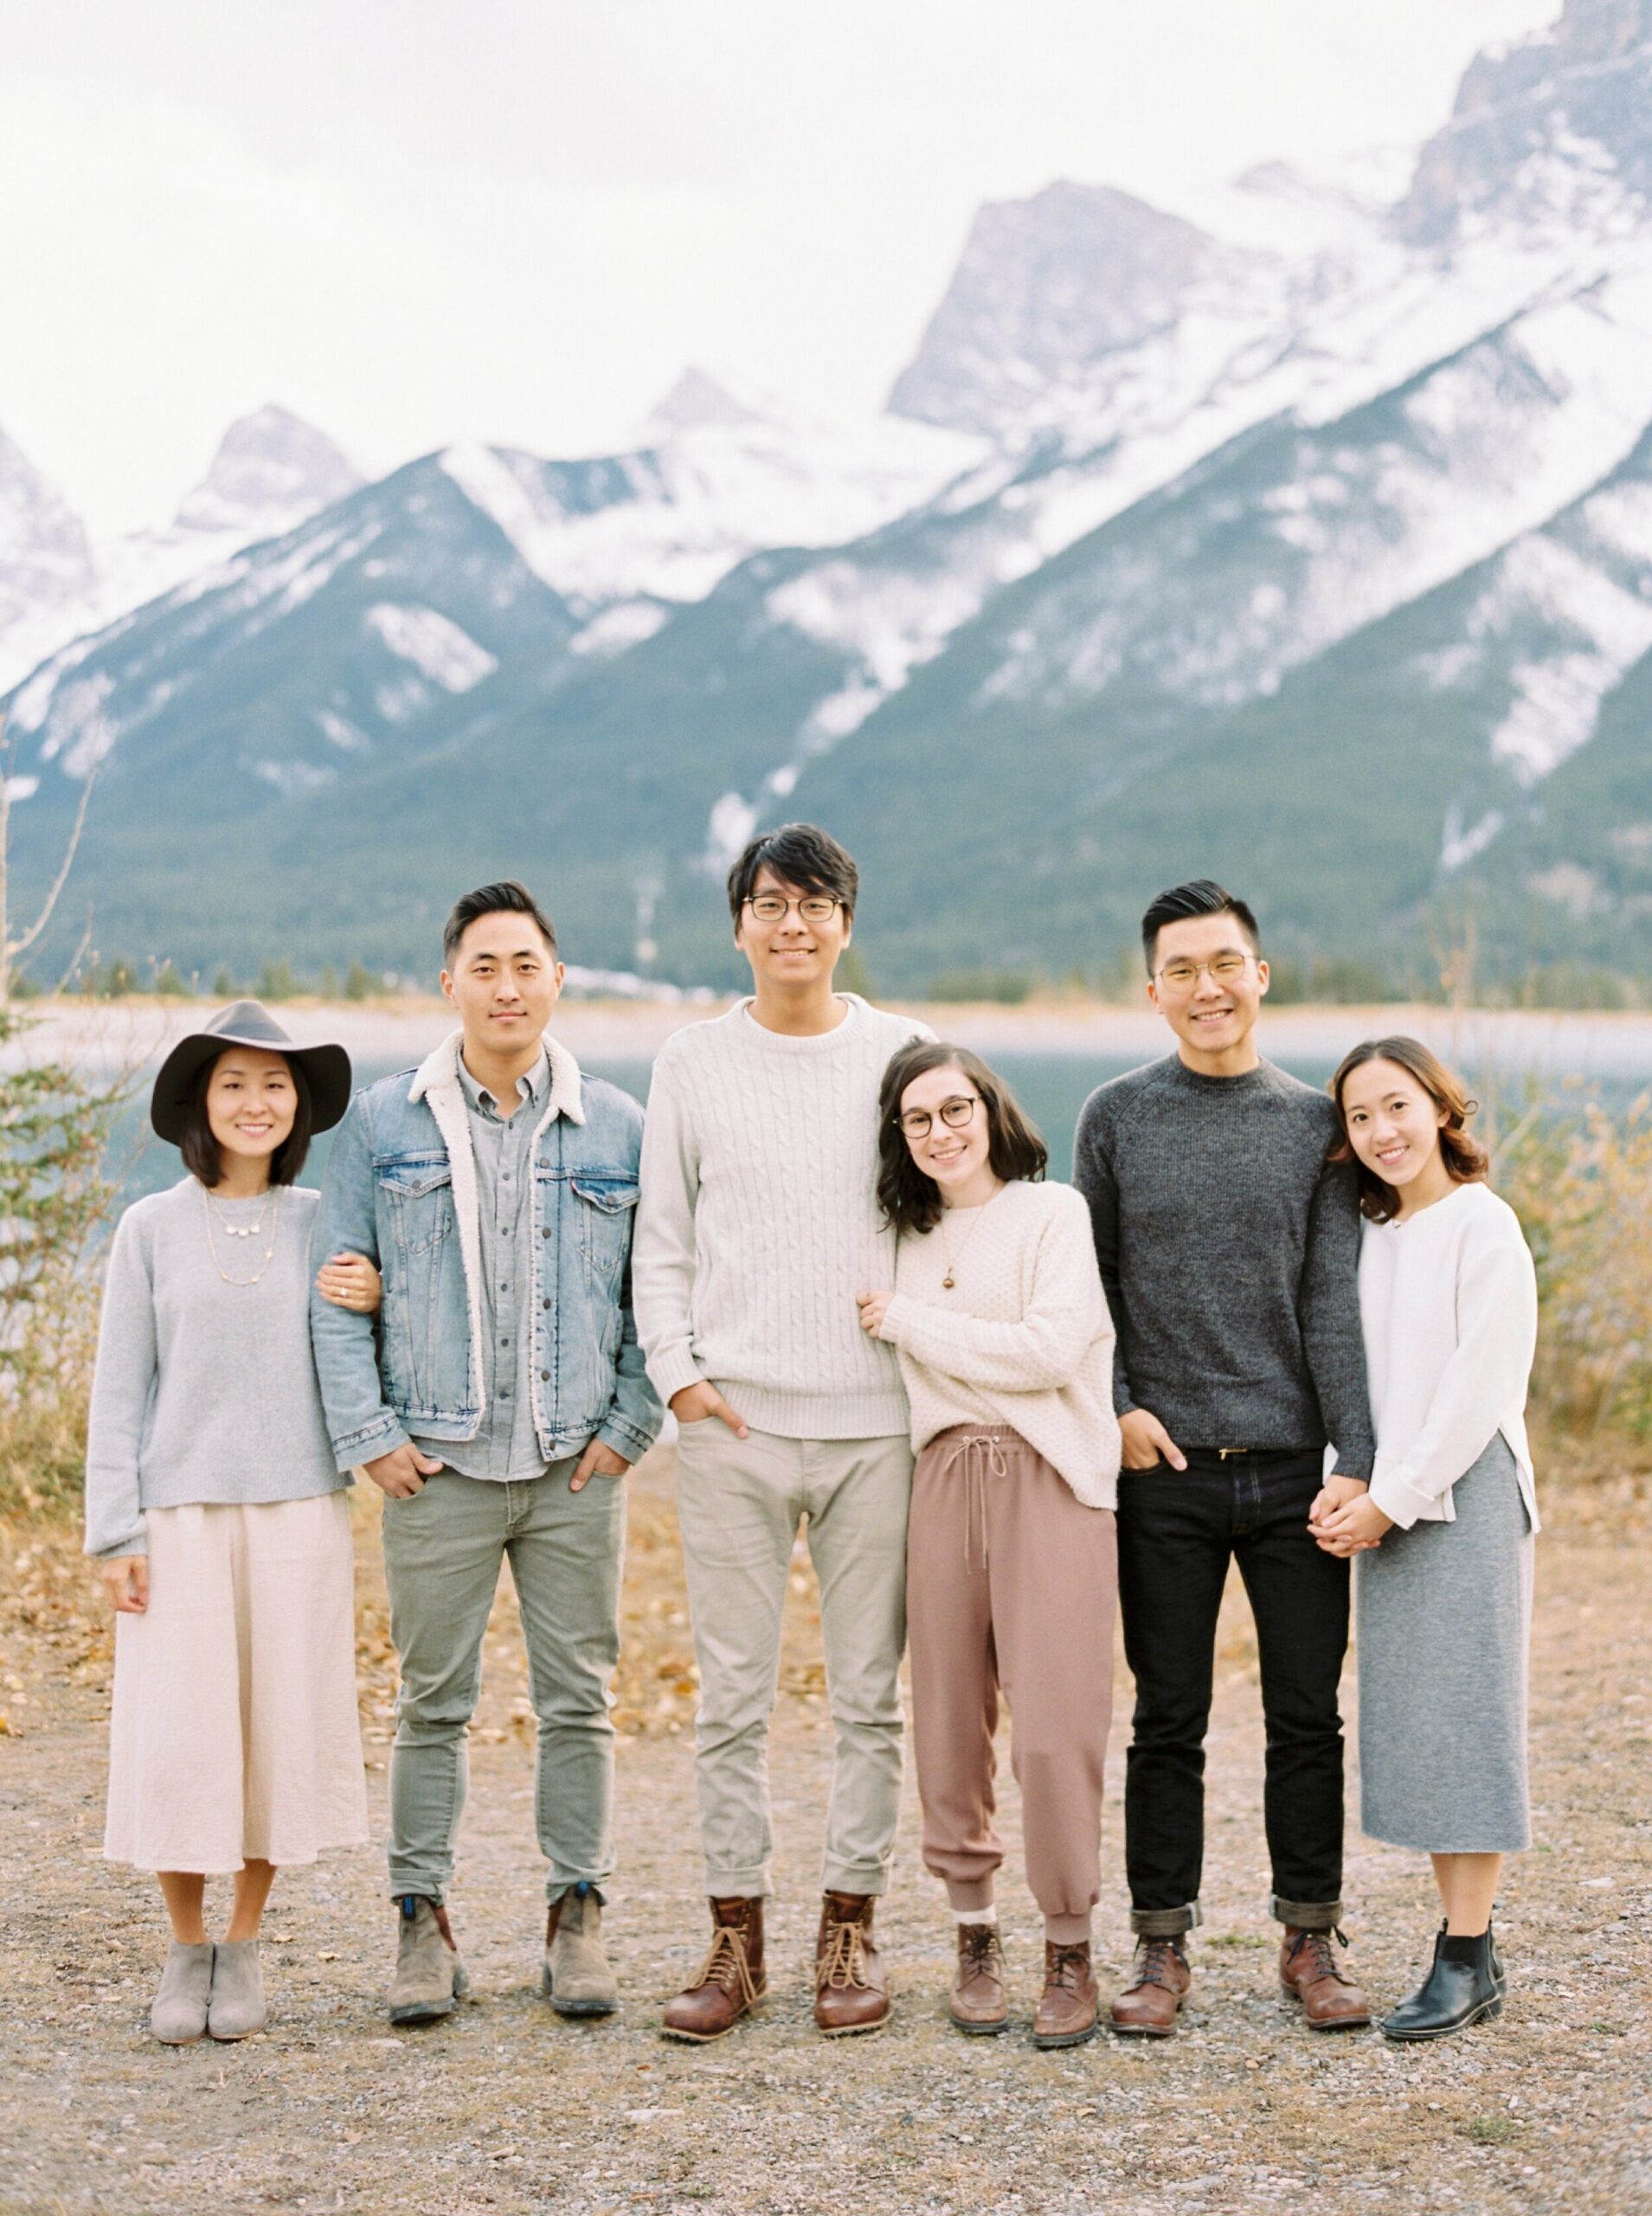  Canmore extended family session | film family photographer | calgary photographers | justine milton photography 